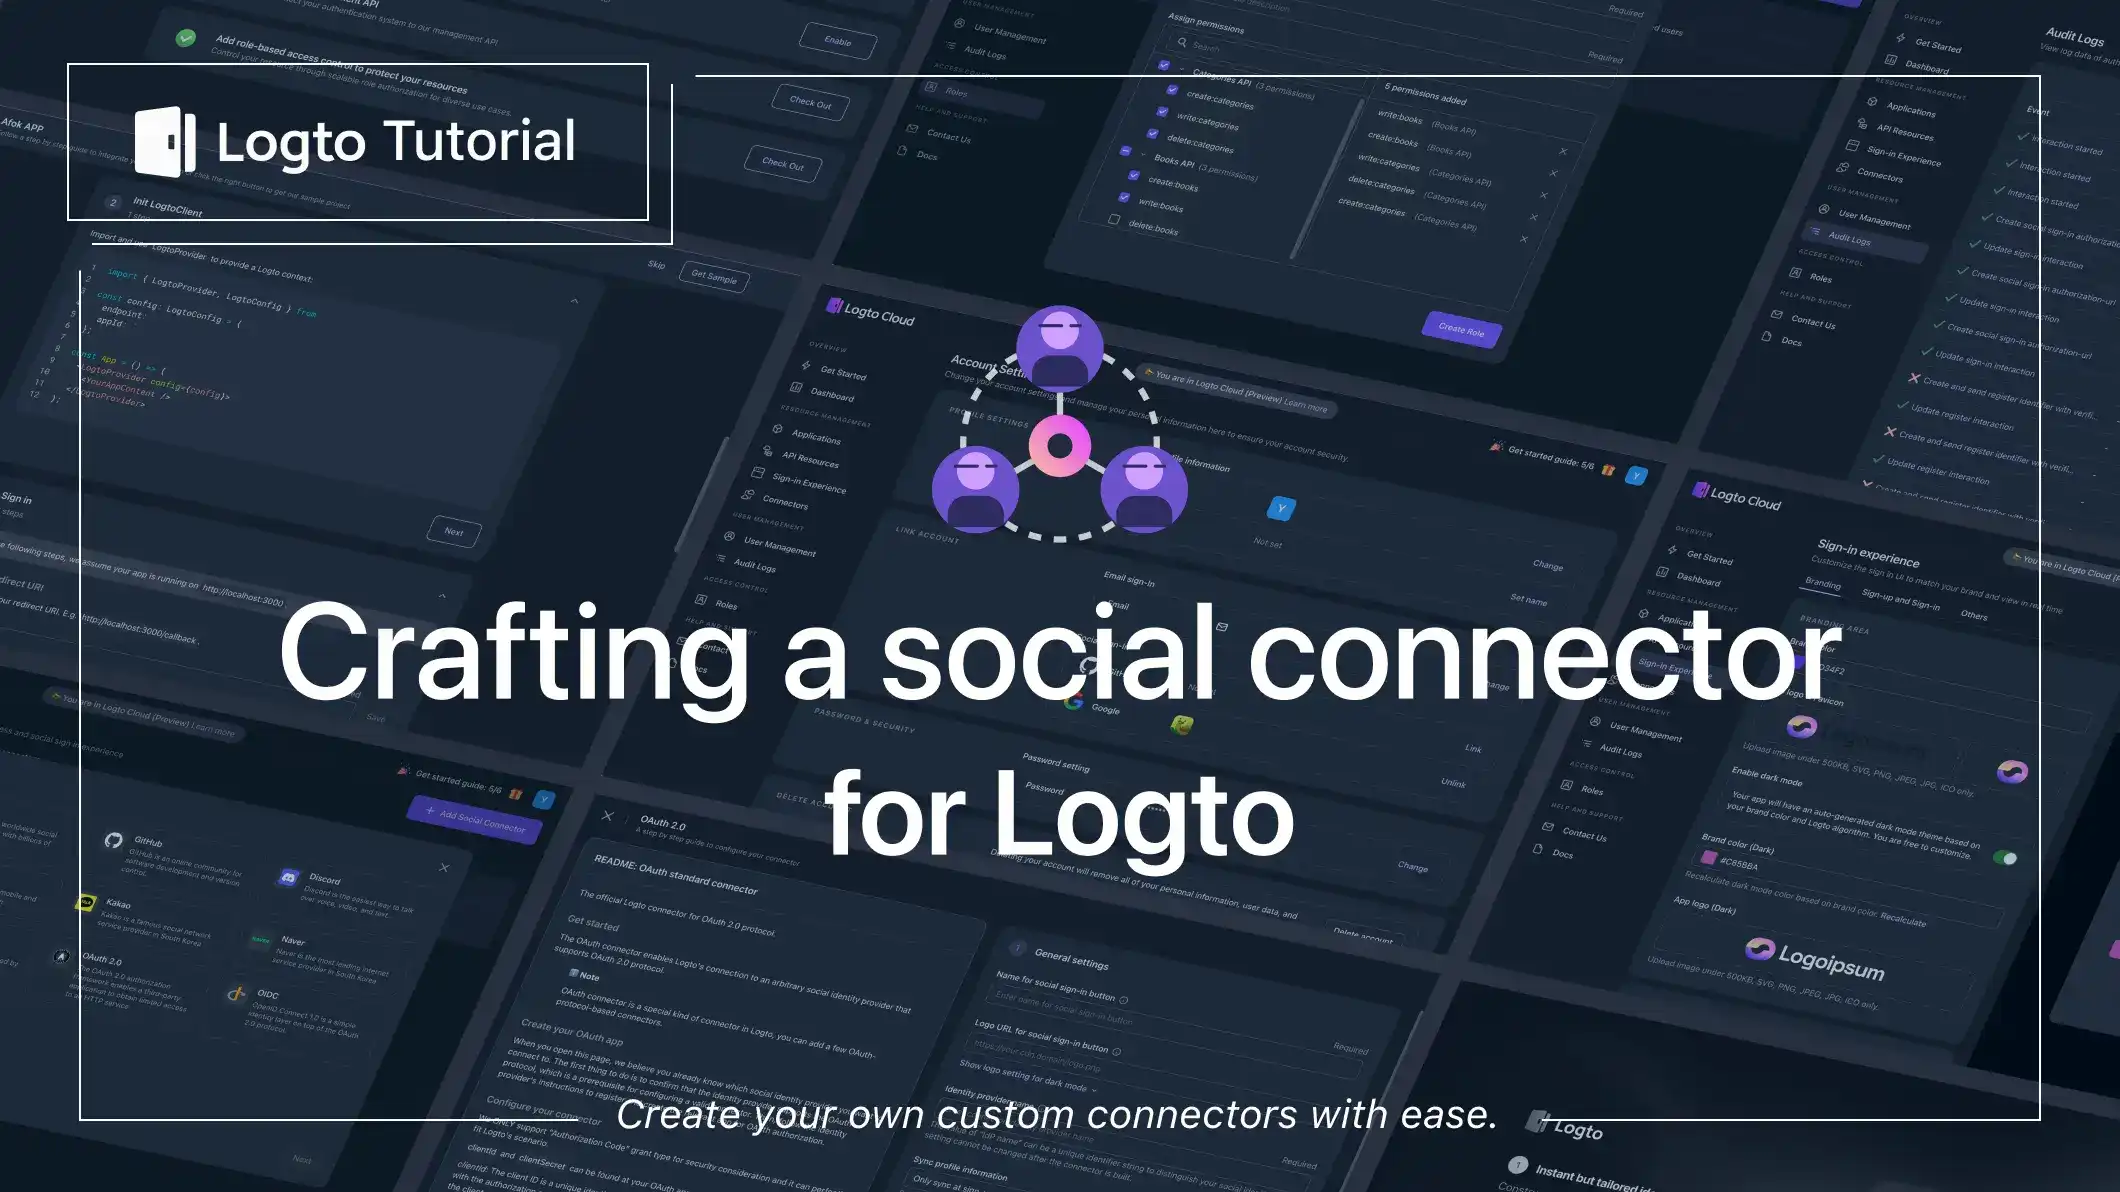 Crafting a social connector for Logto